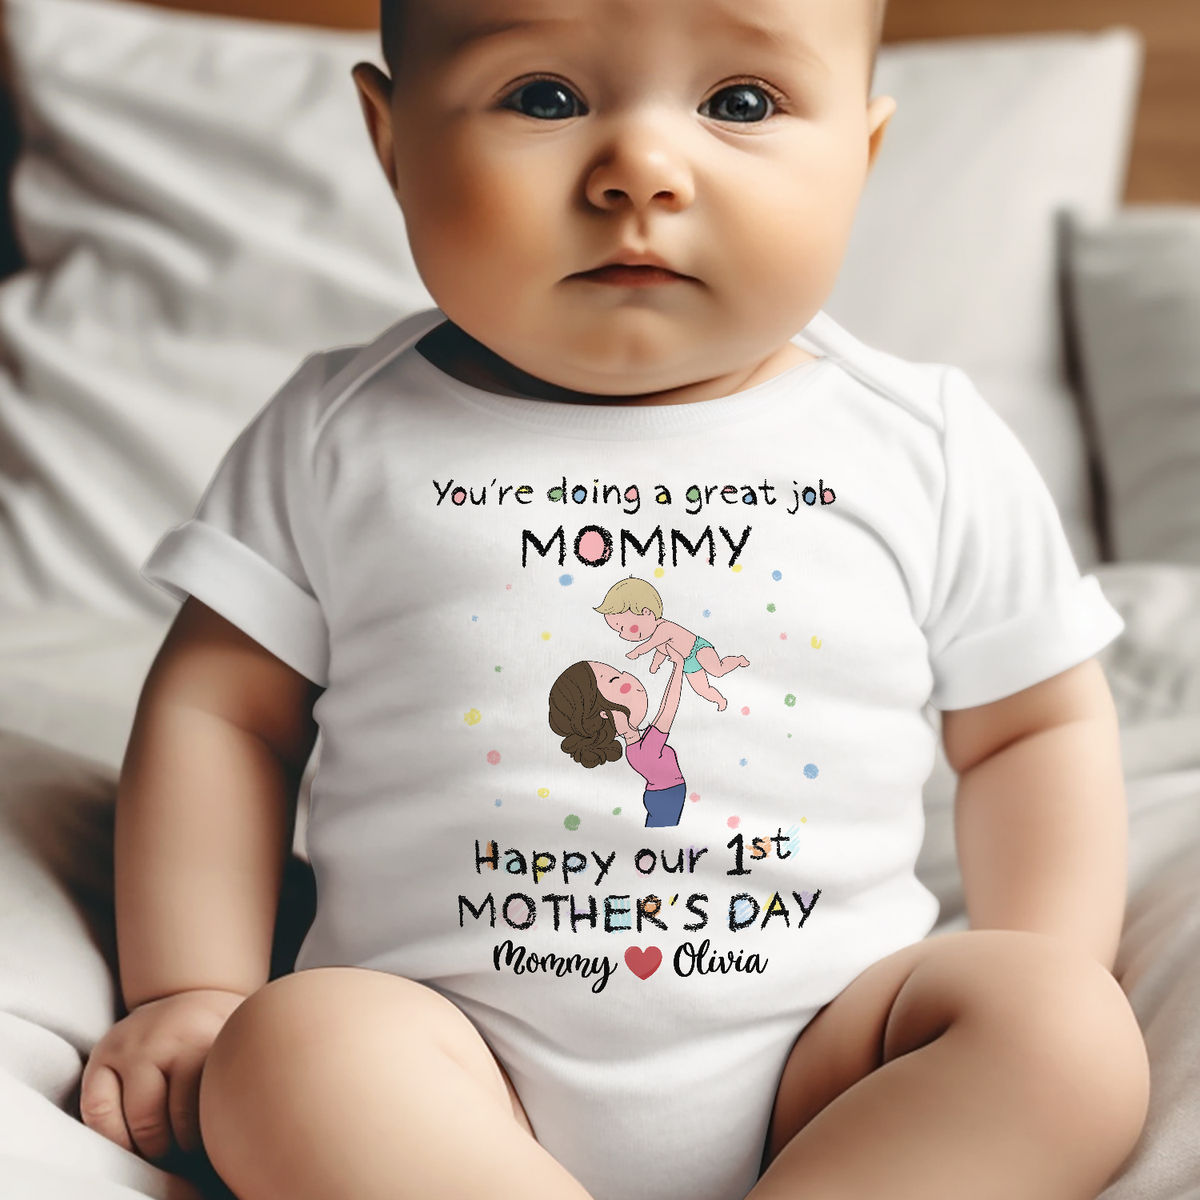 Personalized Shirt - Custom Baby Onesies - You're doing a great job Mommy - Happy our 1st Mother's Day (27868)_1